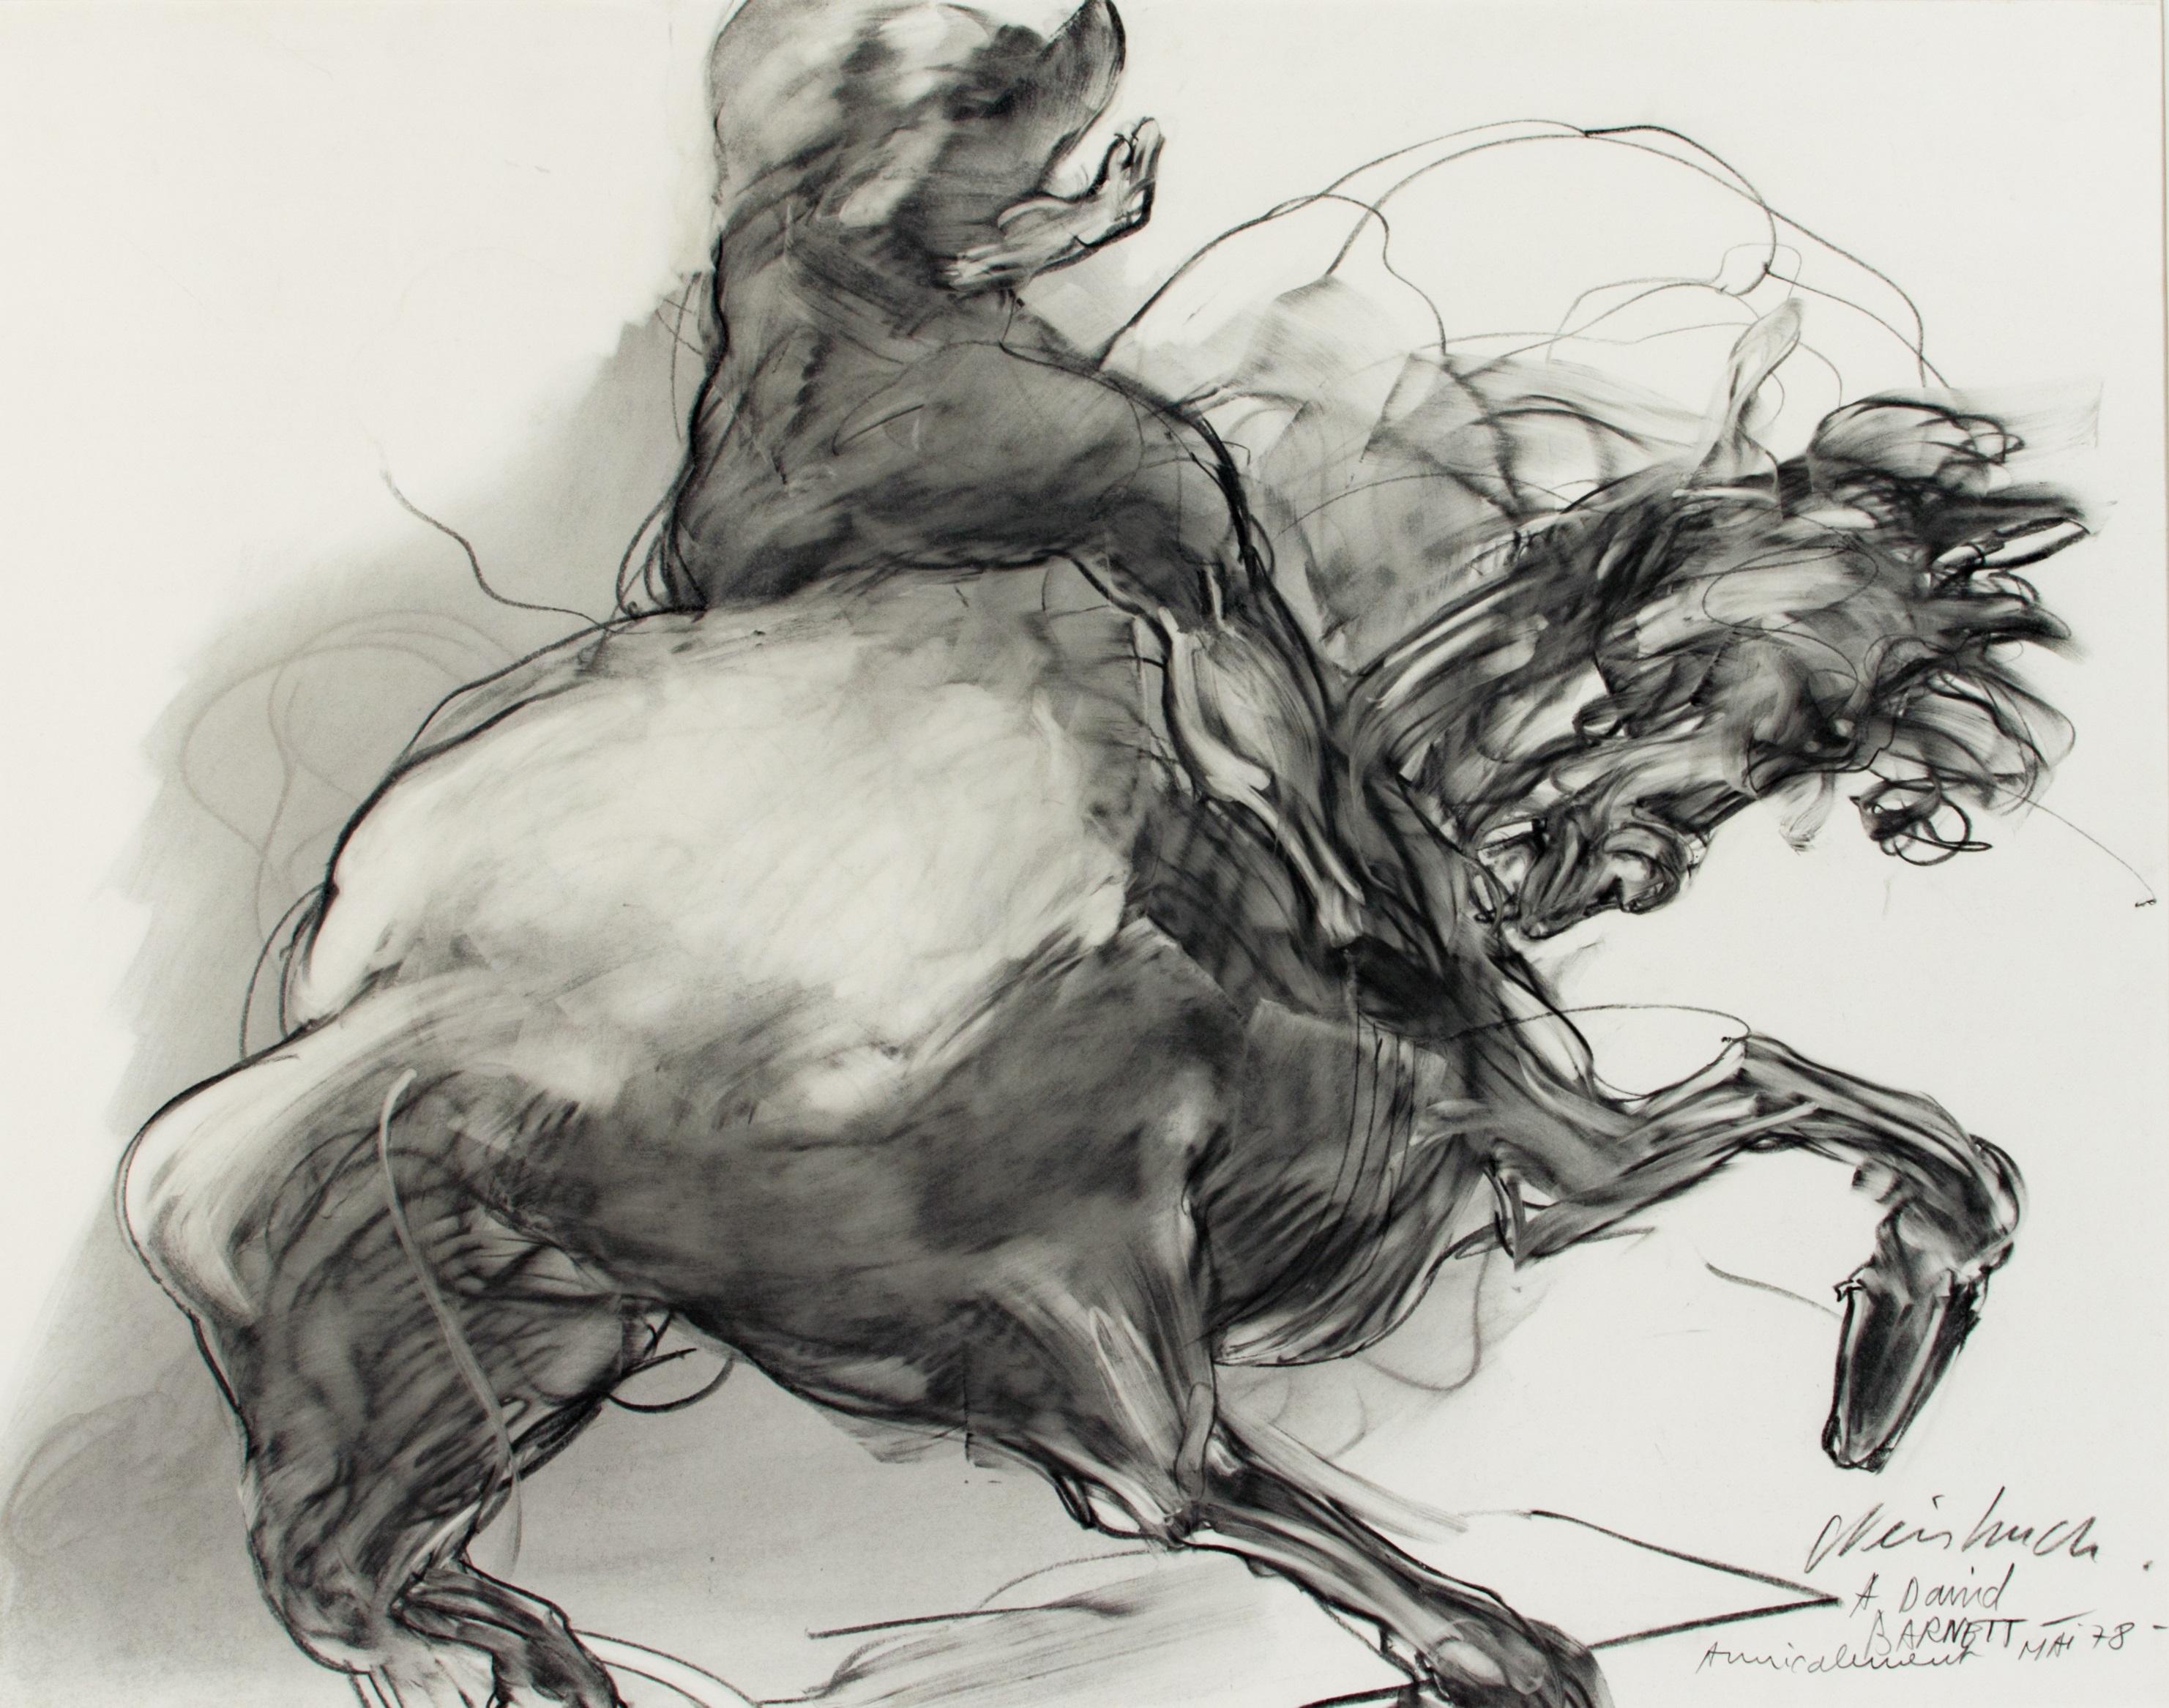 'Horseman' charcoal on paper, signed and dated - Art by Claude Weisbuch